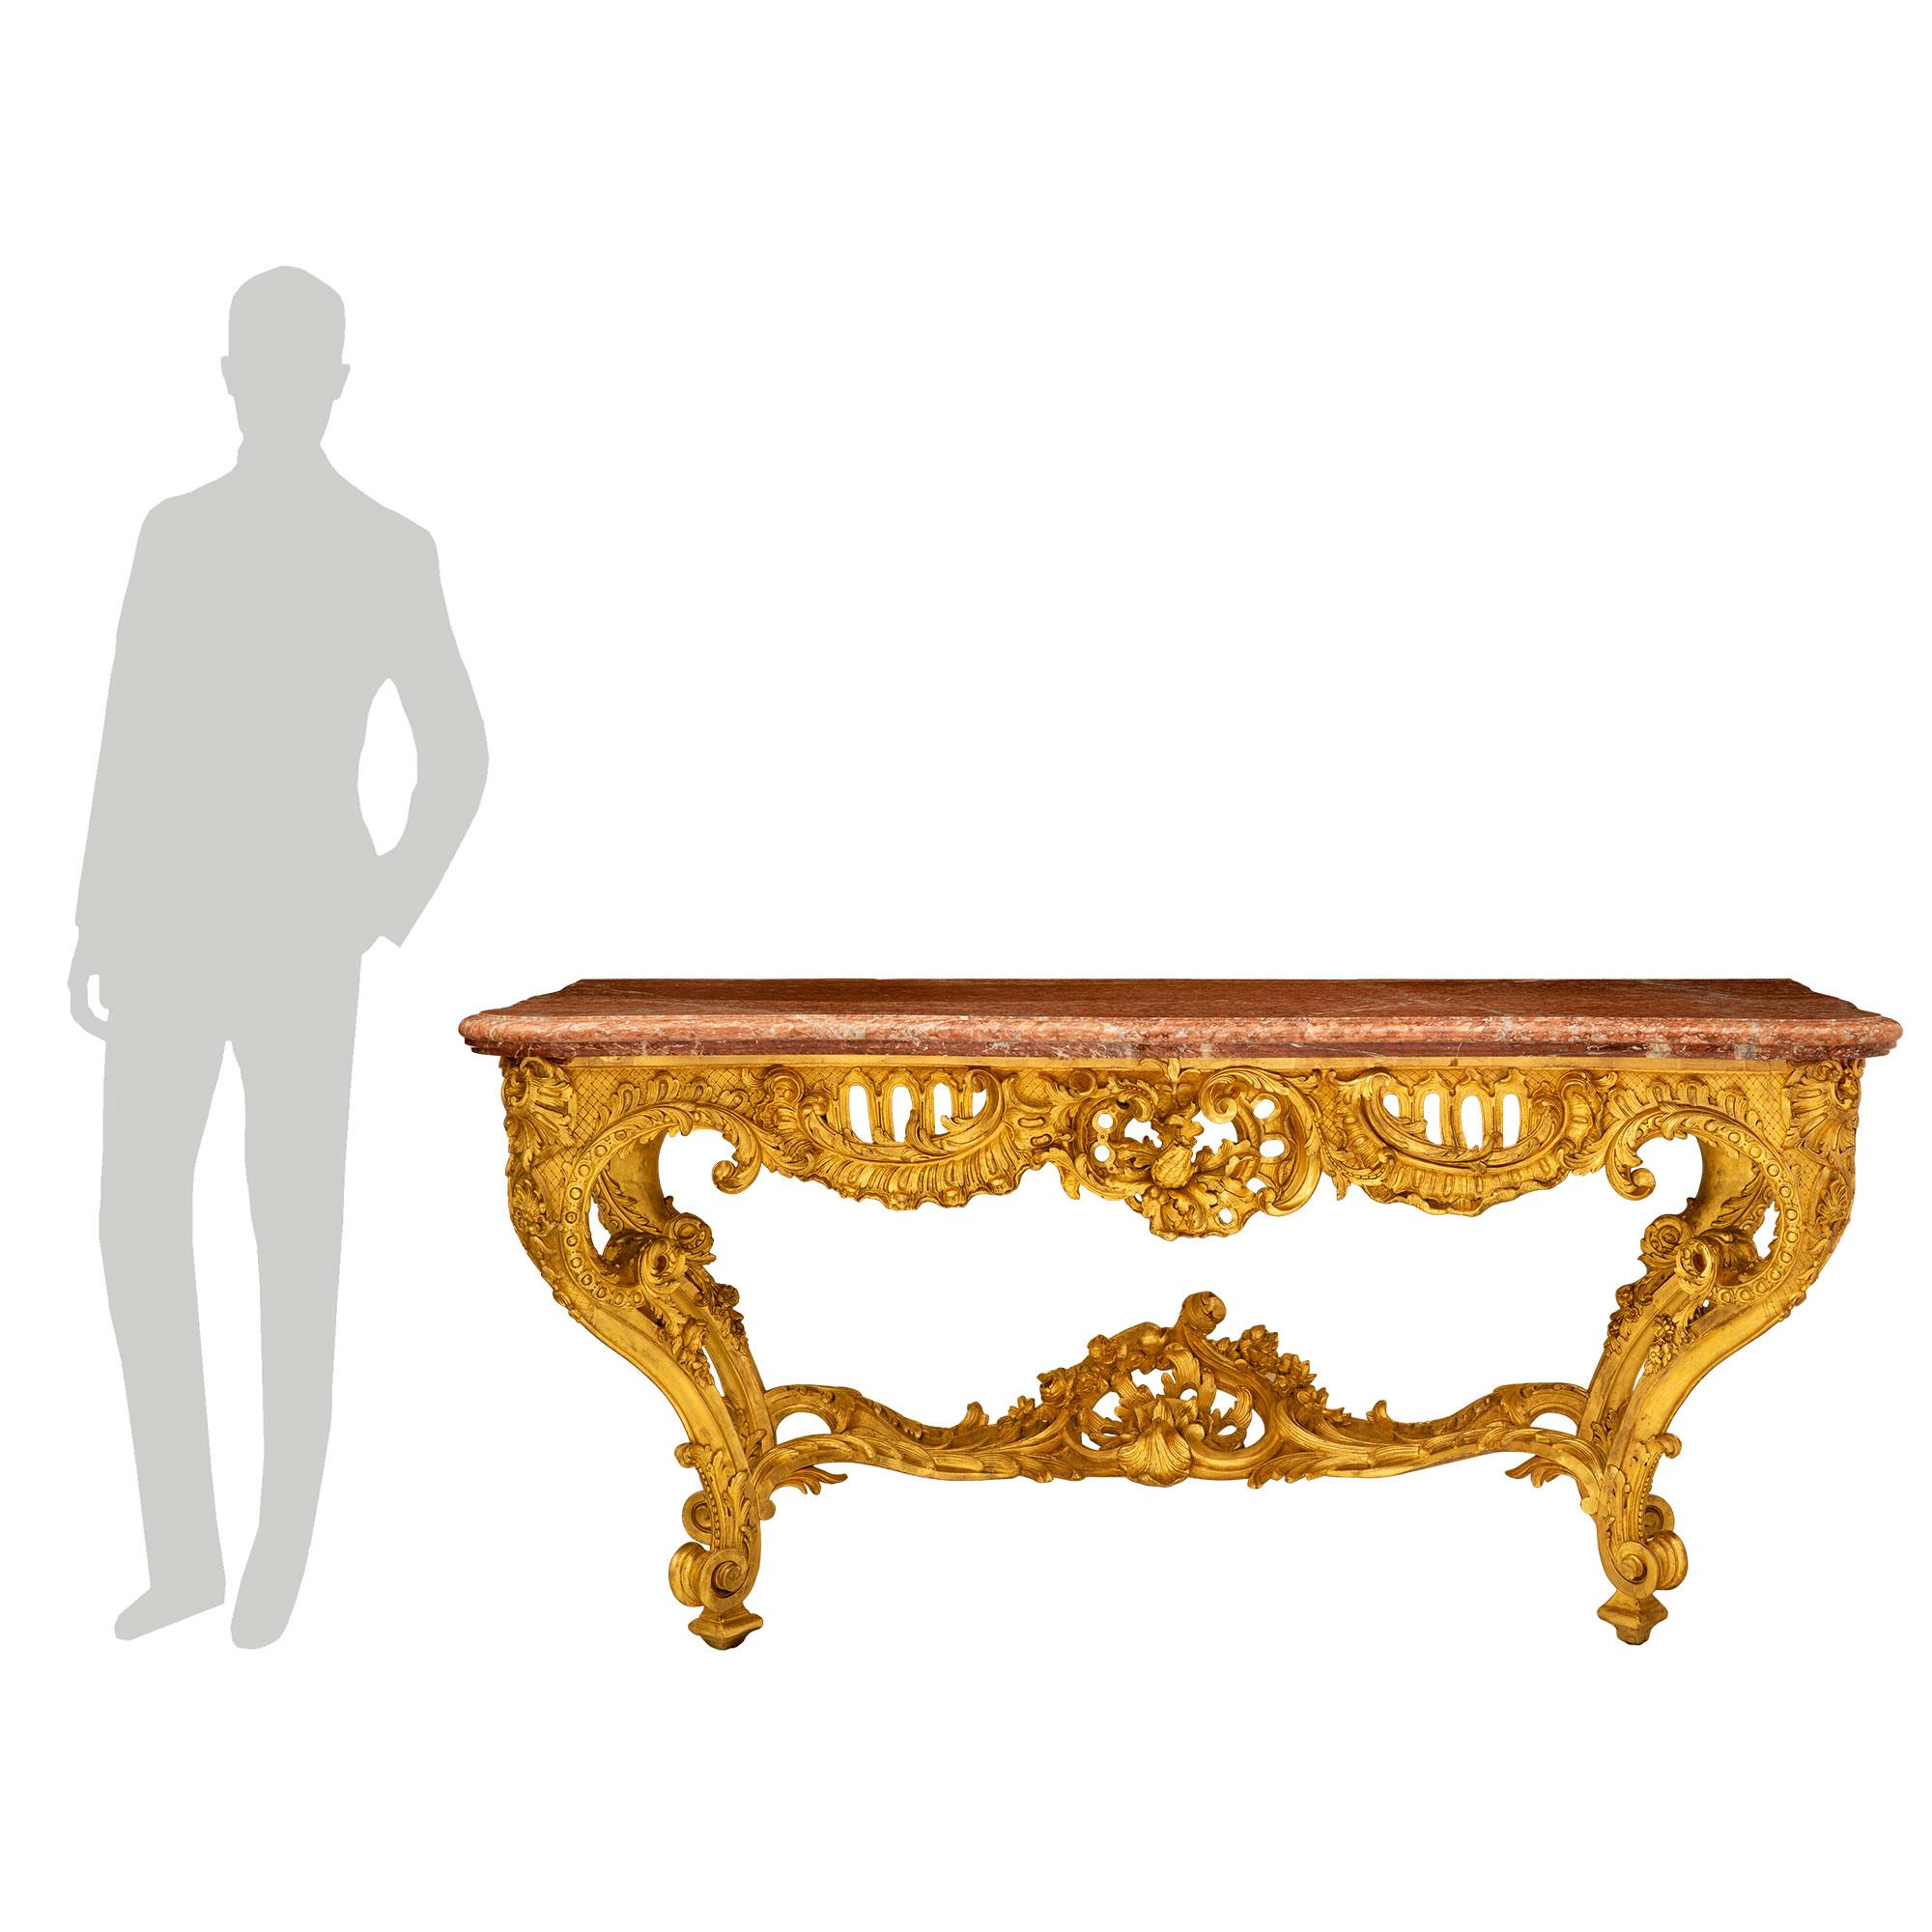 A stunning and most impressive French 19th century Louis XV st. giltwood and Rouge de Languedoc marble console. The freestanding console is raised by beautiful tapered cabriole legs with fine square feet and striking scrolled richly carved acanthus